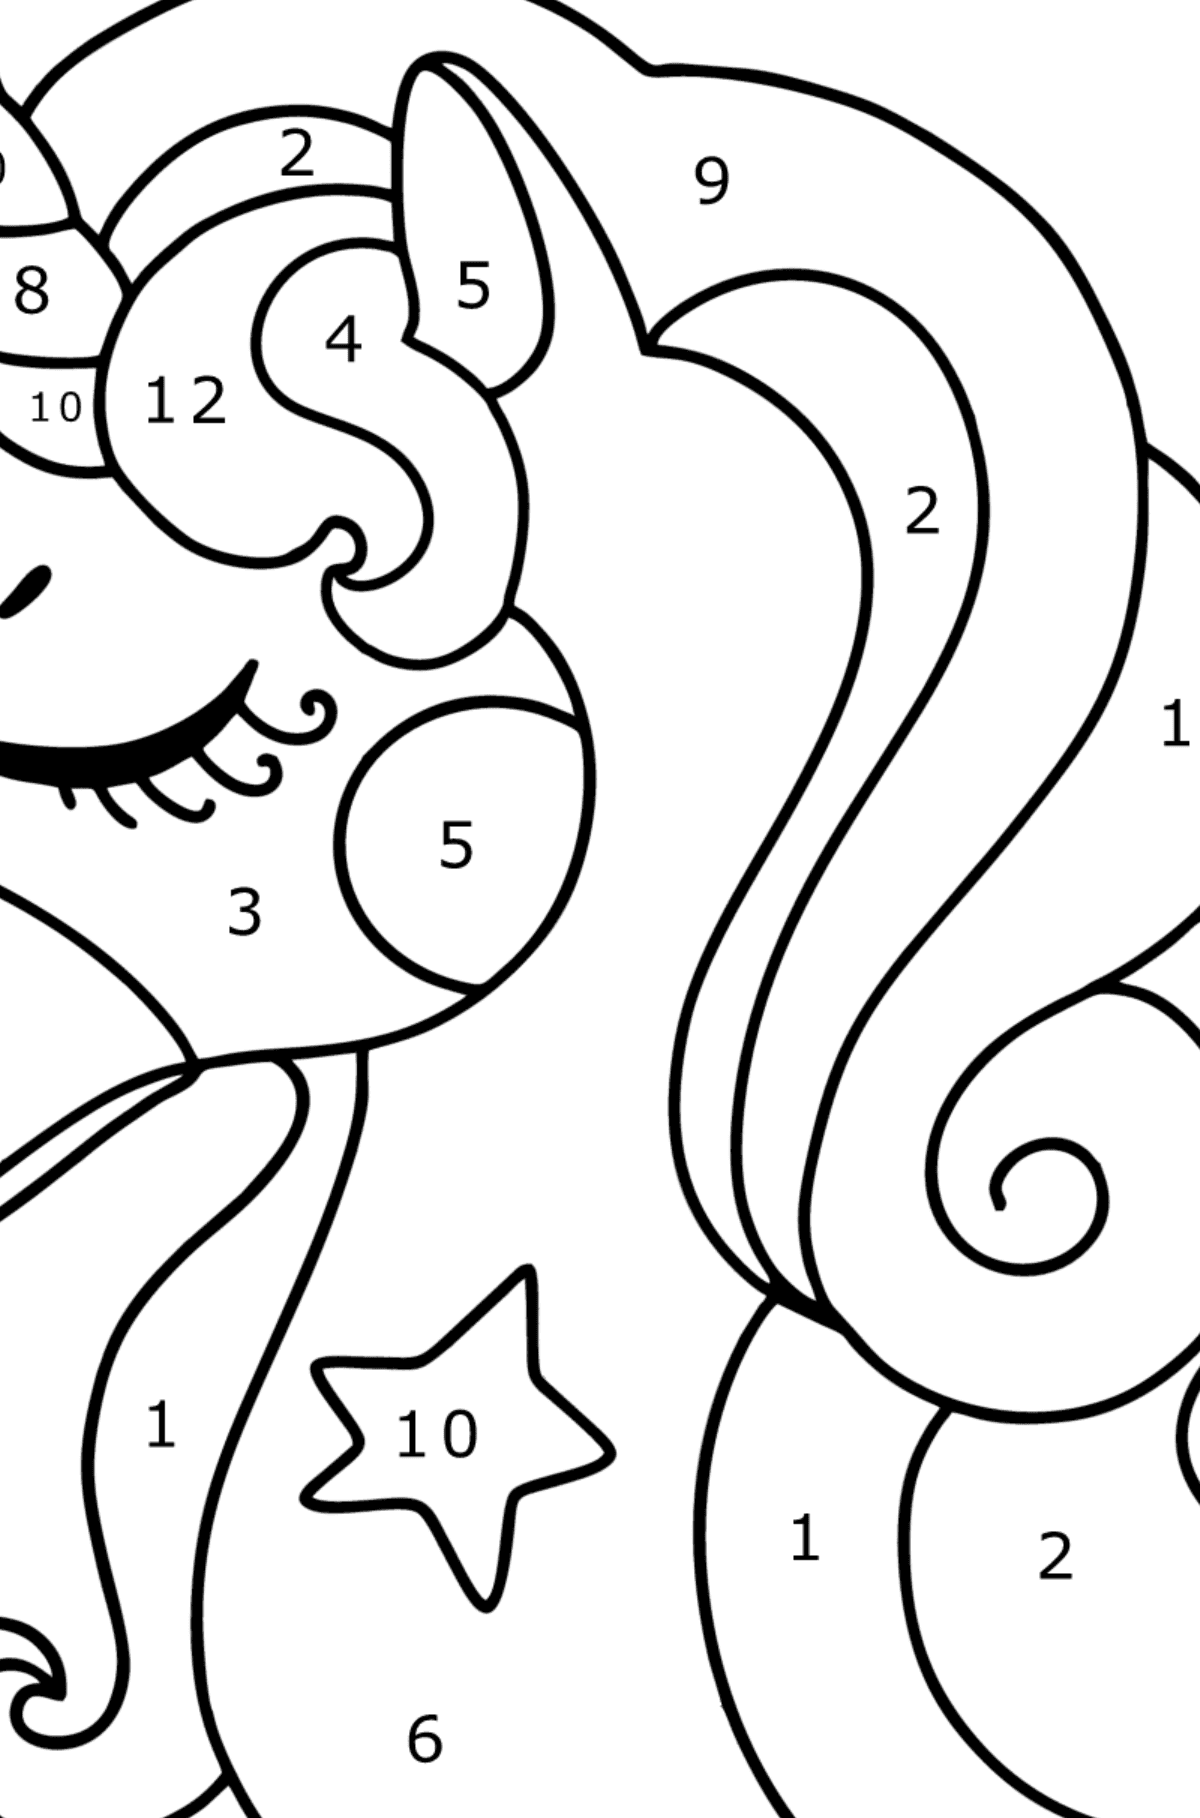 Unicorn head coloring page - Coloring by Numbers for Kids